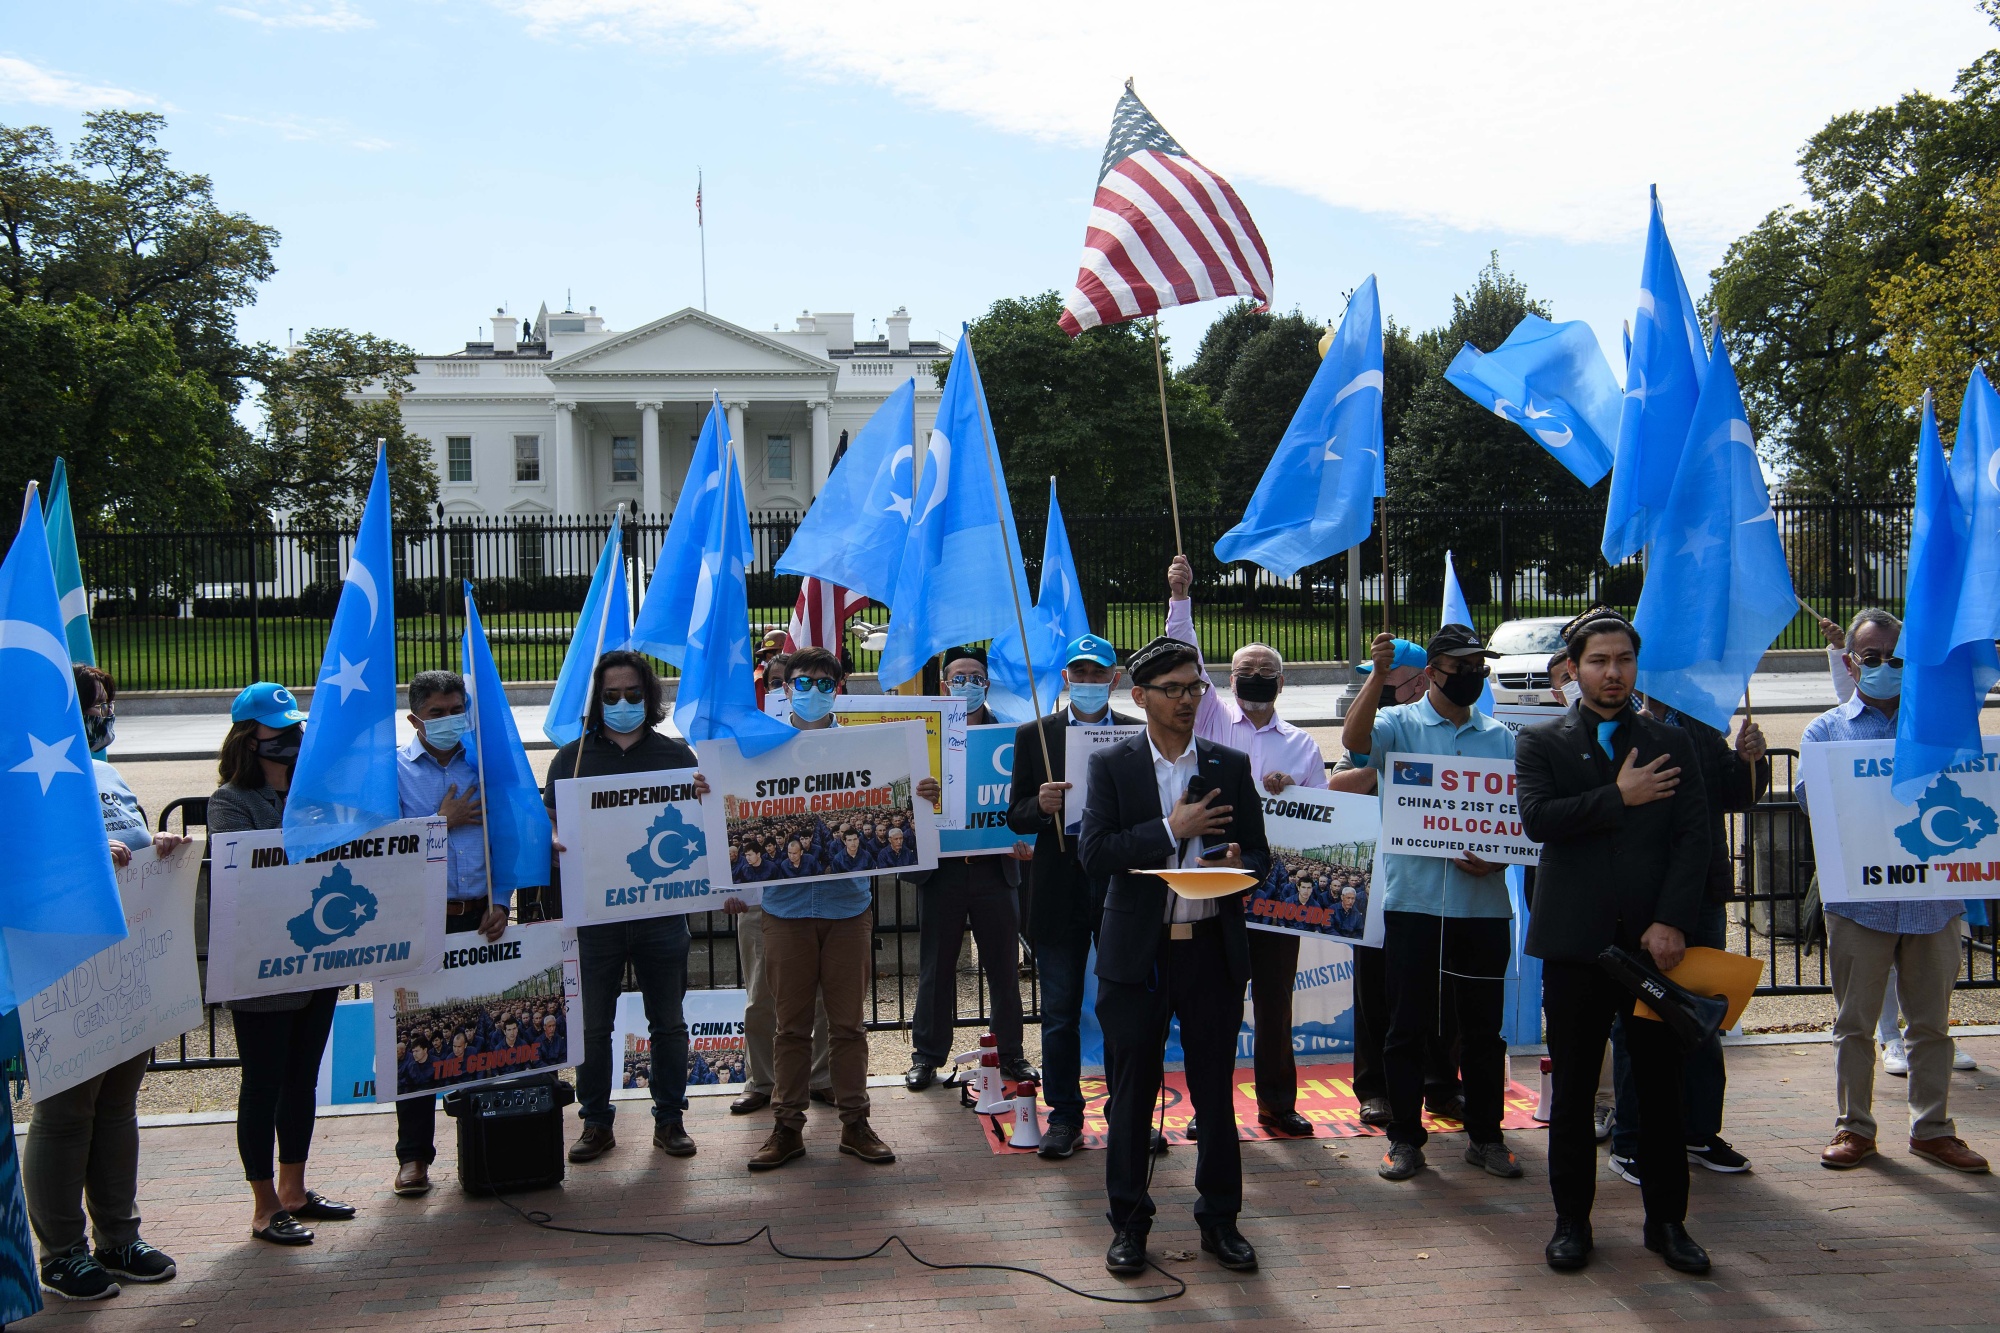 Uighurs&nbsp;protest the 71st anniversary of the People's Republic of China in front of the White House on Oct. 1, 2020.&nbsp;